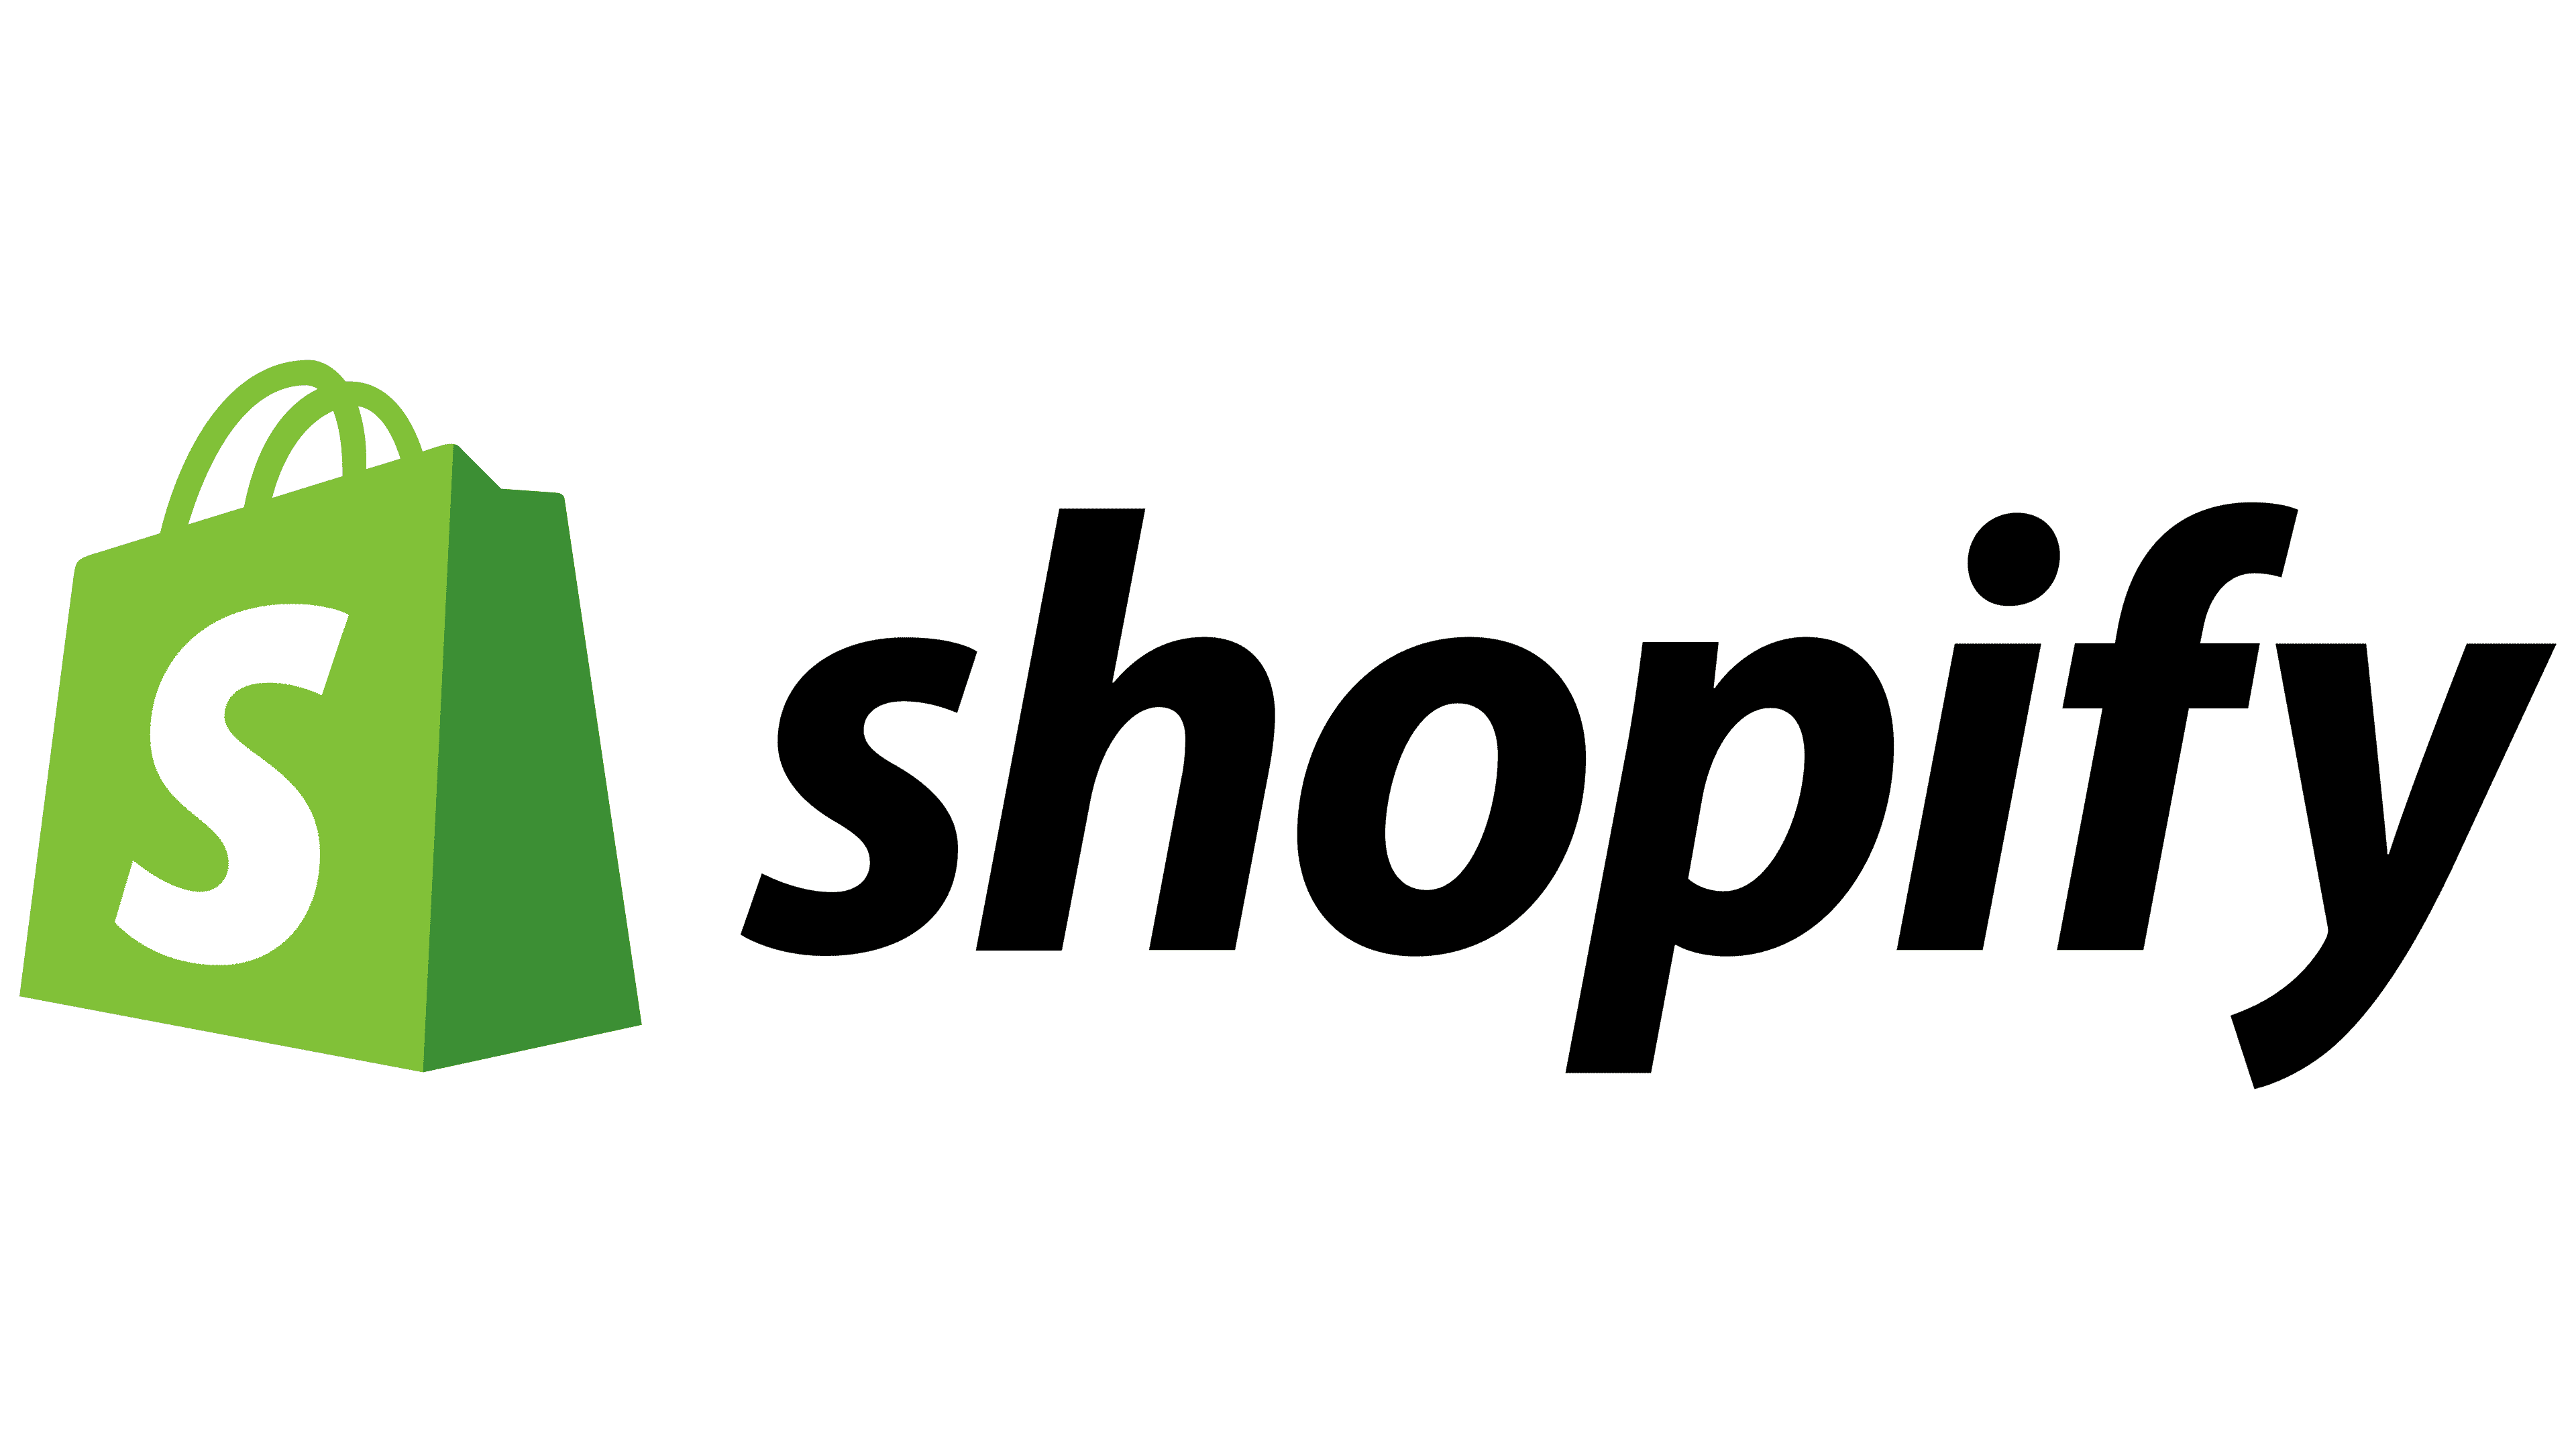 WooCommerce vs Shopify: Which Will be Better for You? - Shopify Logo